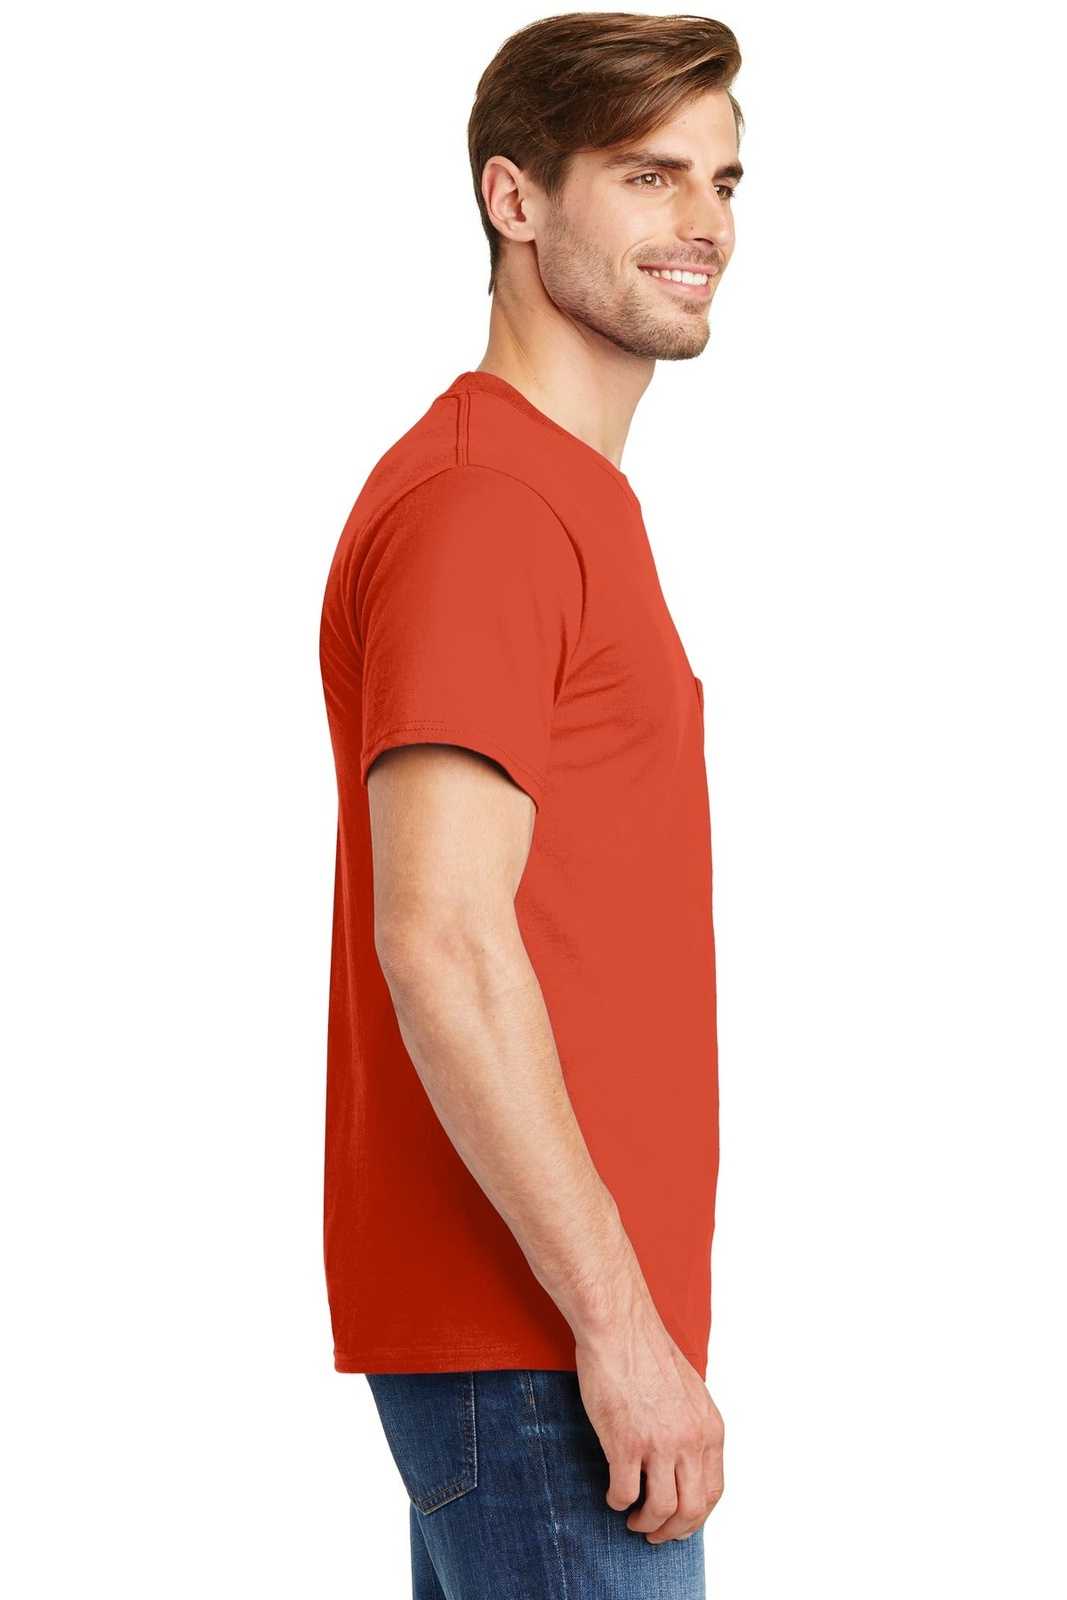 Hanes 5190 Beefy-T 100% Cotton T-Shirt with Pocket - Orange - HIT a Double